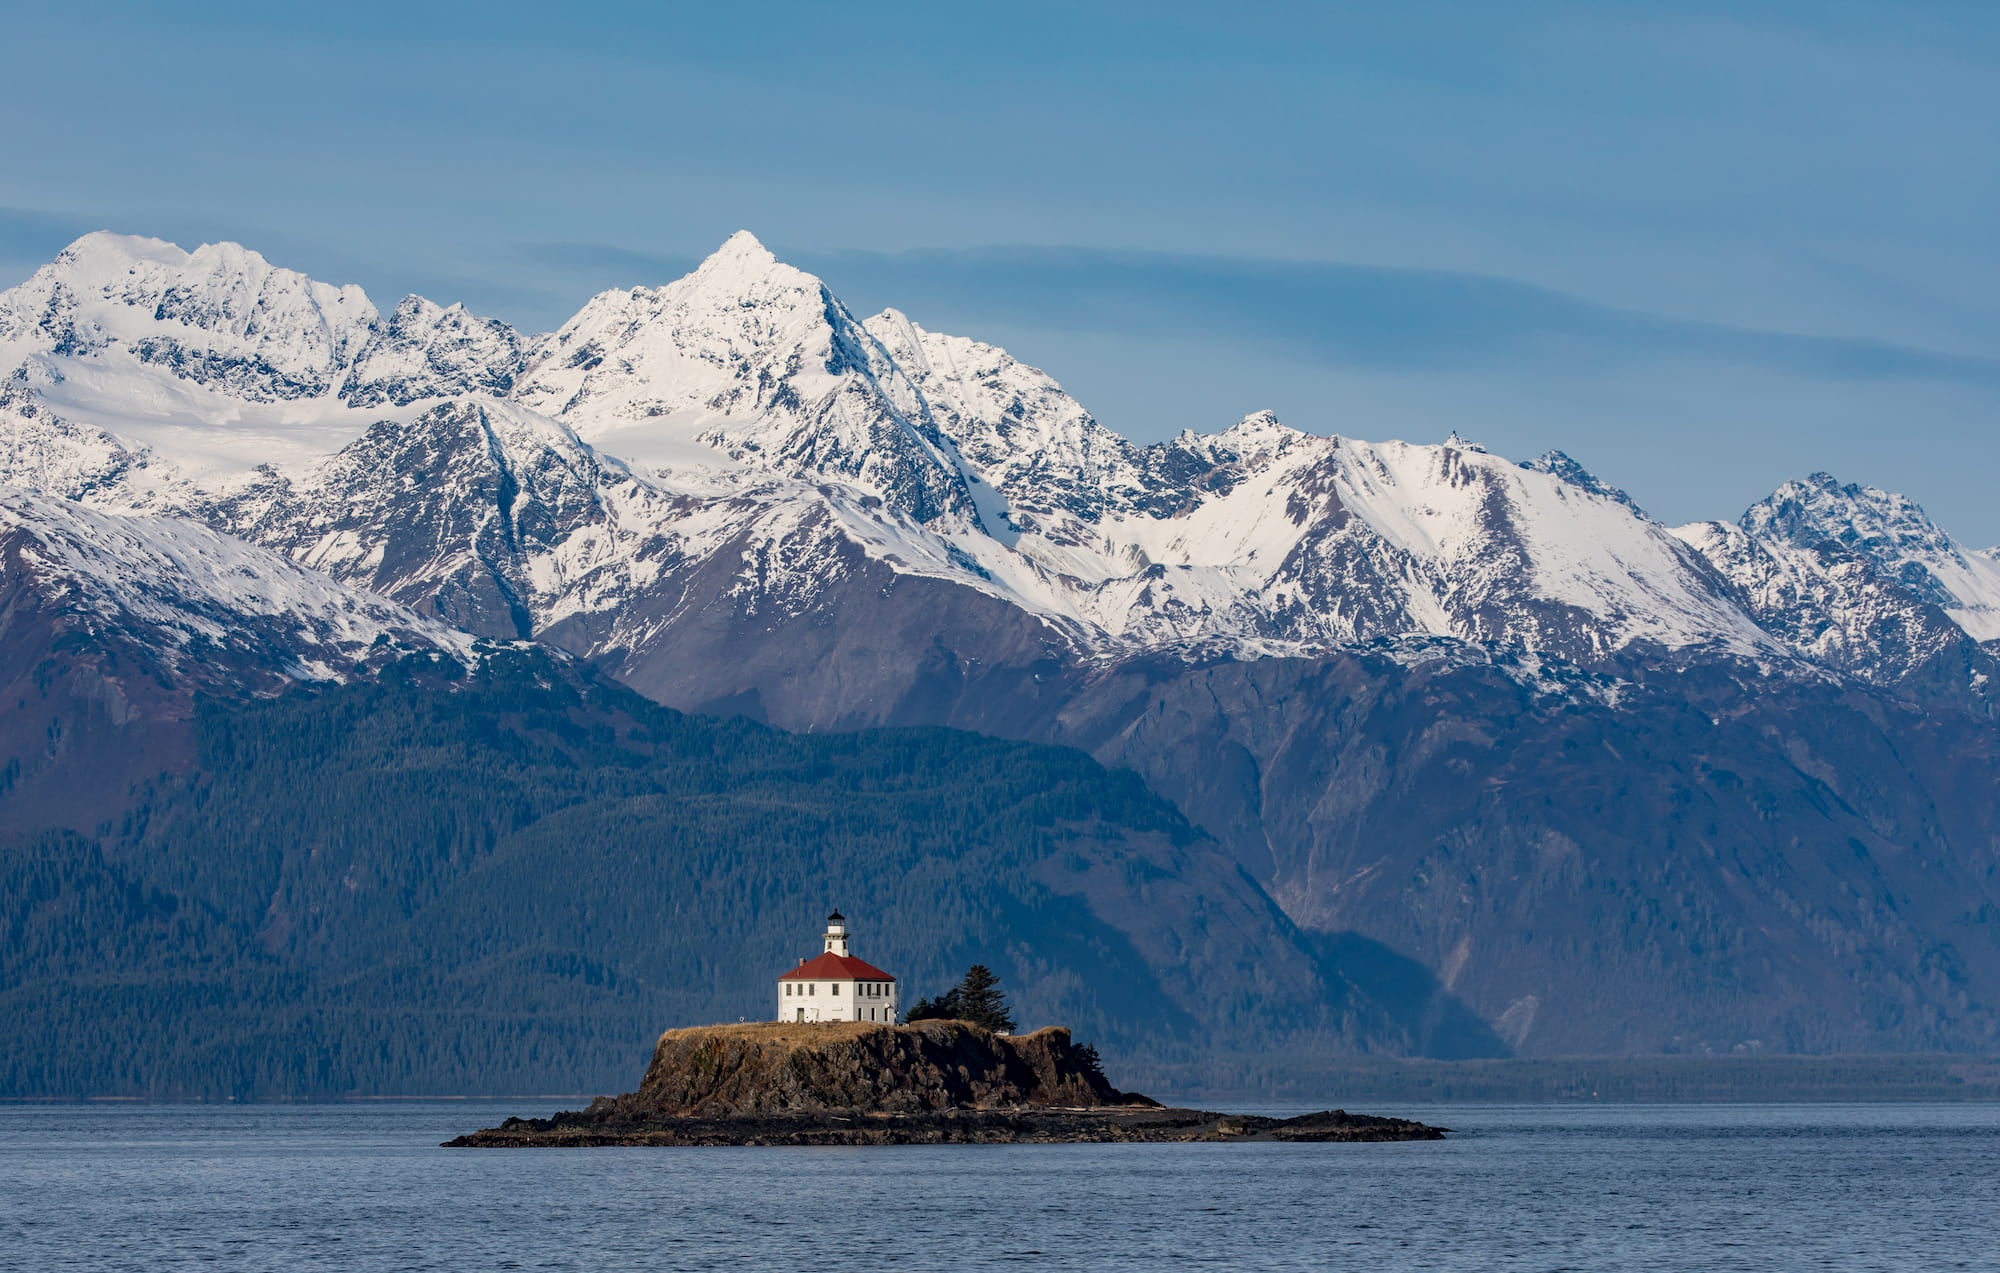 Panoramic view of snow-capped mountains and island with lighthouse on island